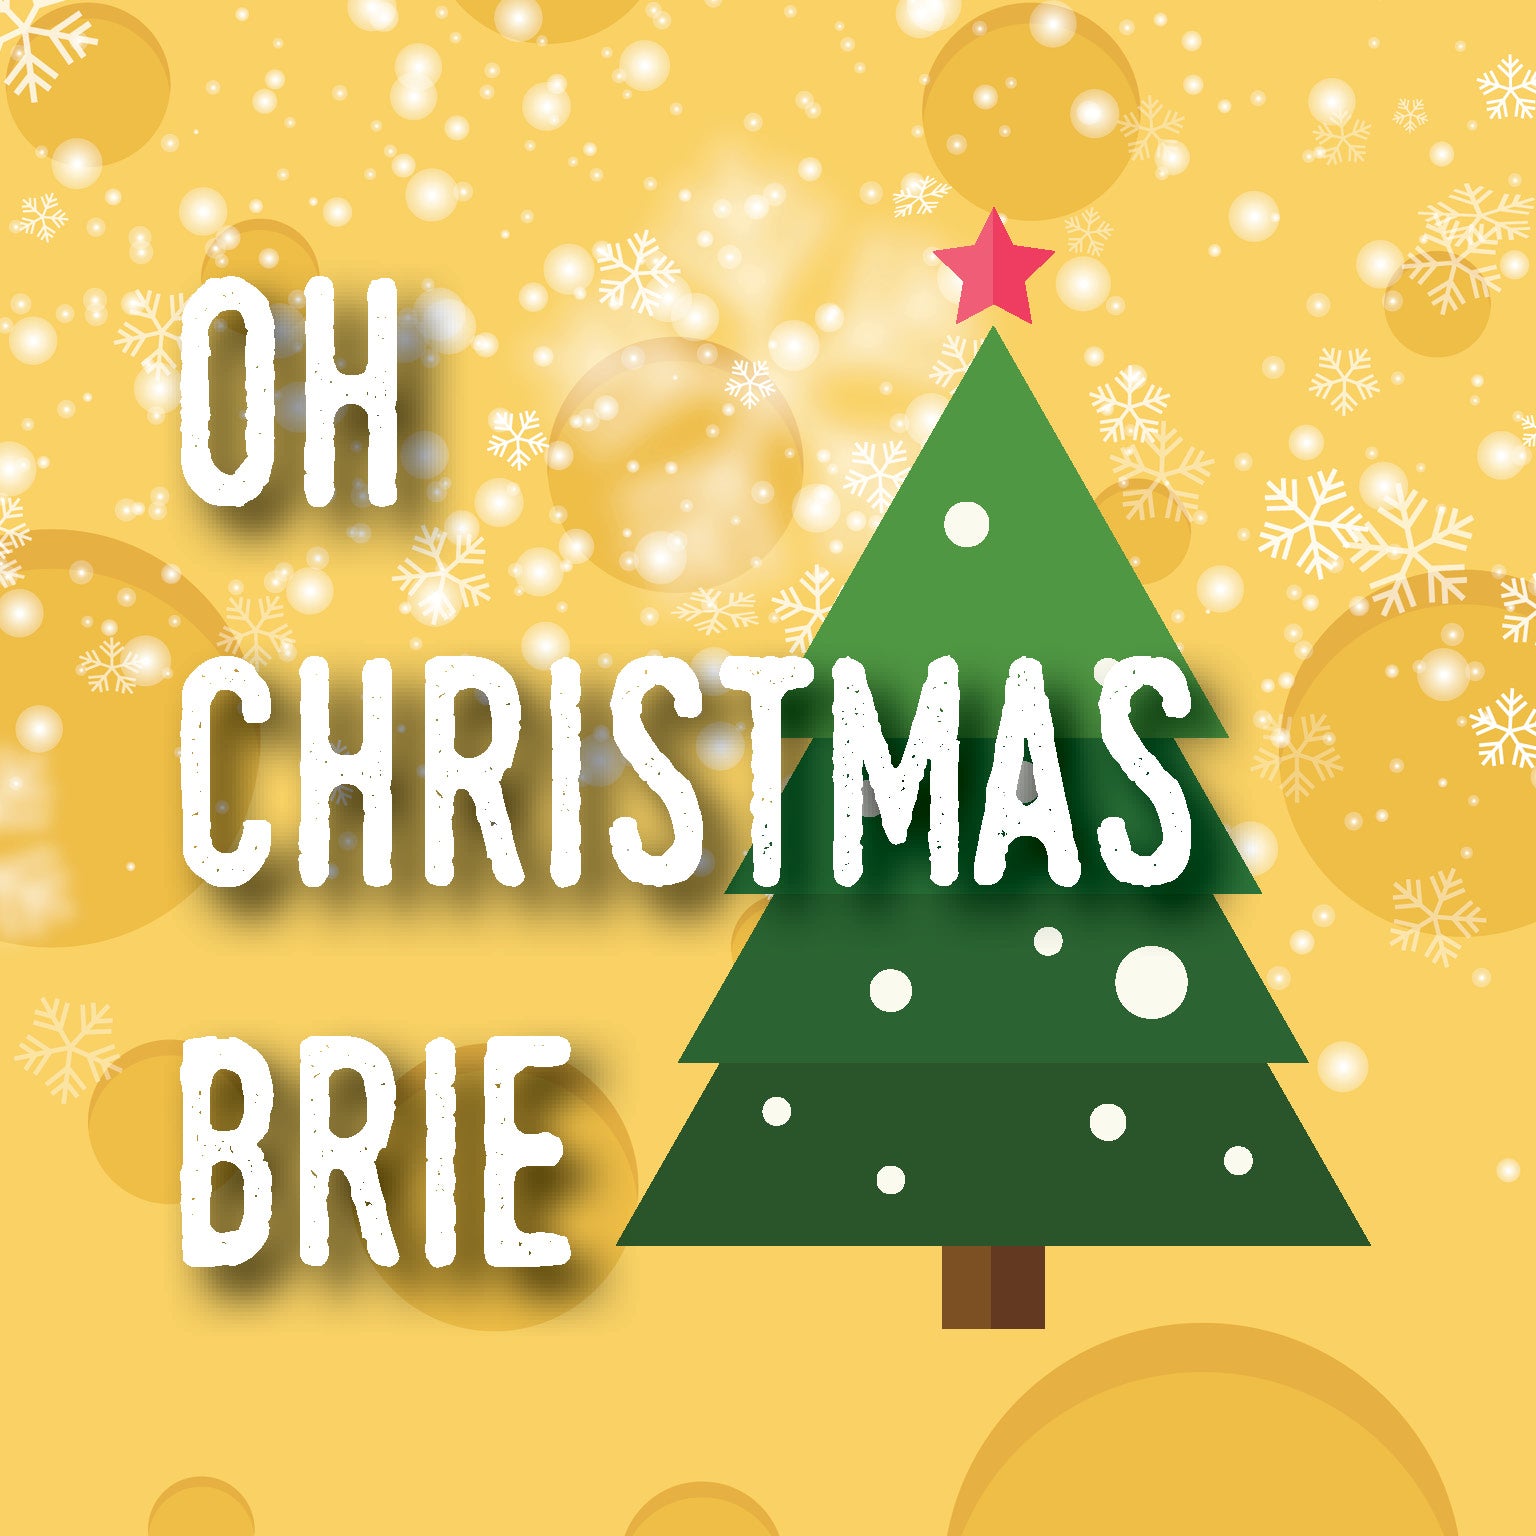 Oh Christmas BRIE